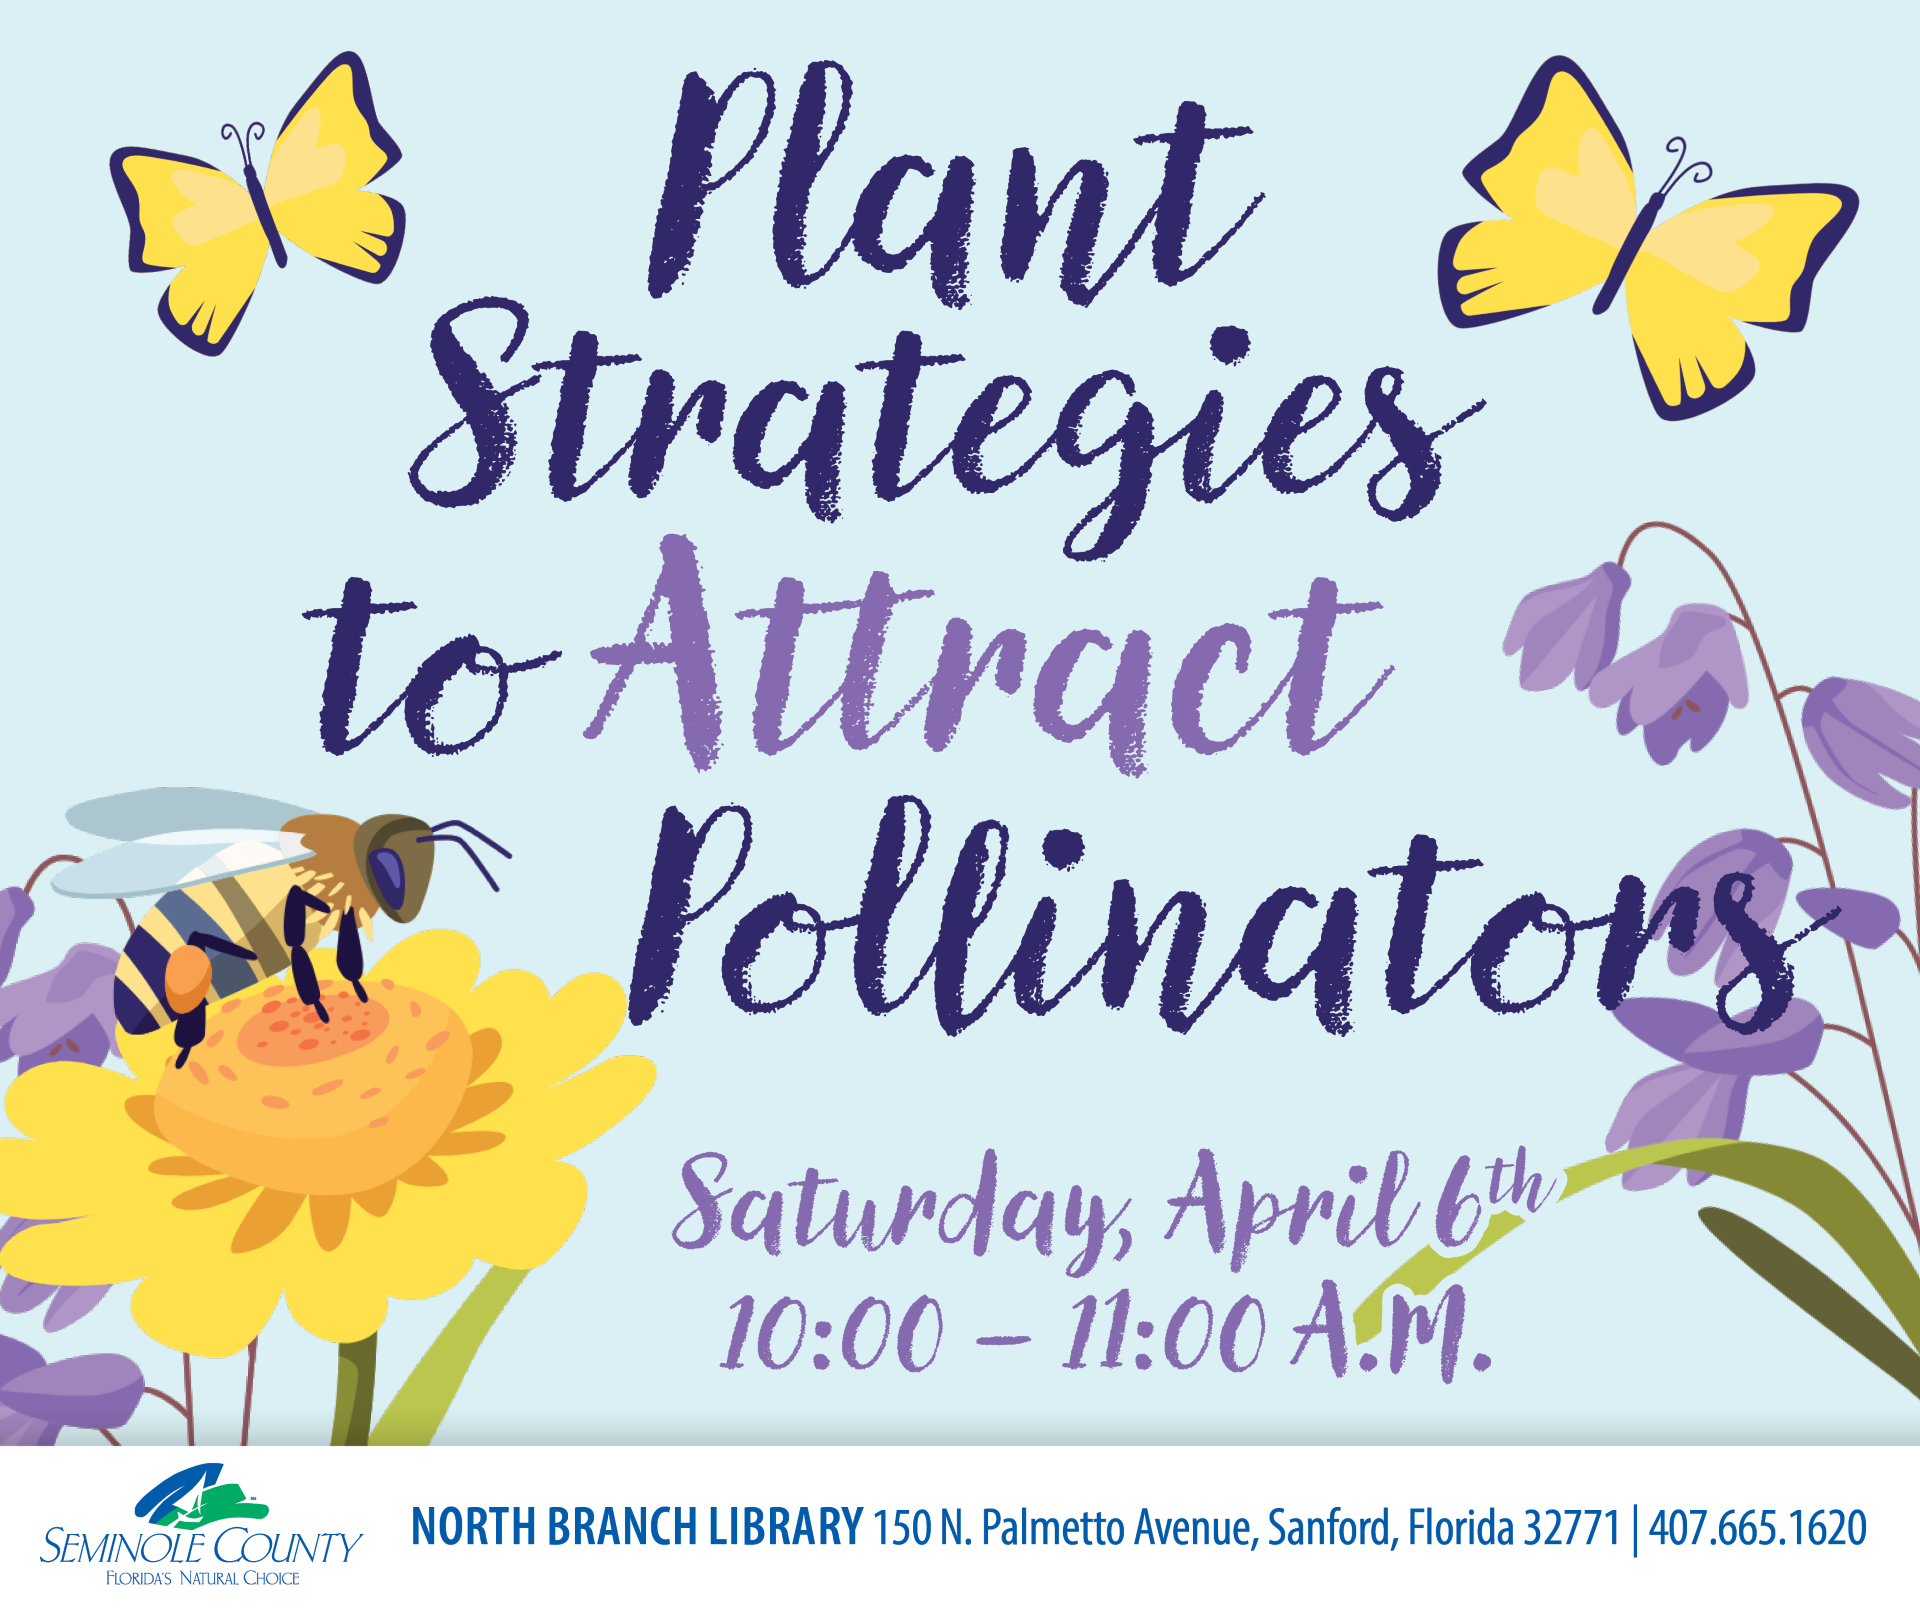 Plant Strategies to Attract Pollinators program at North Branch Library